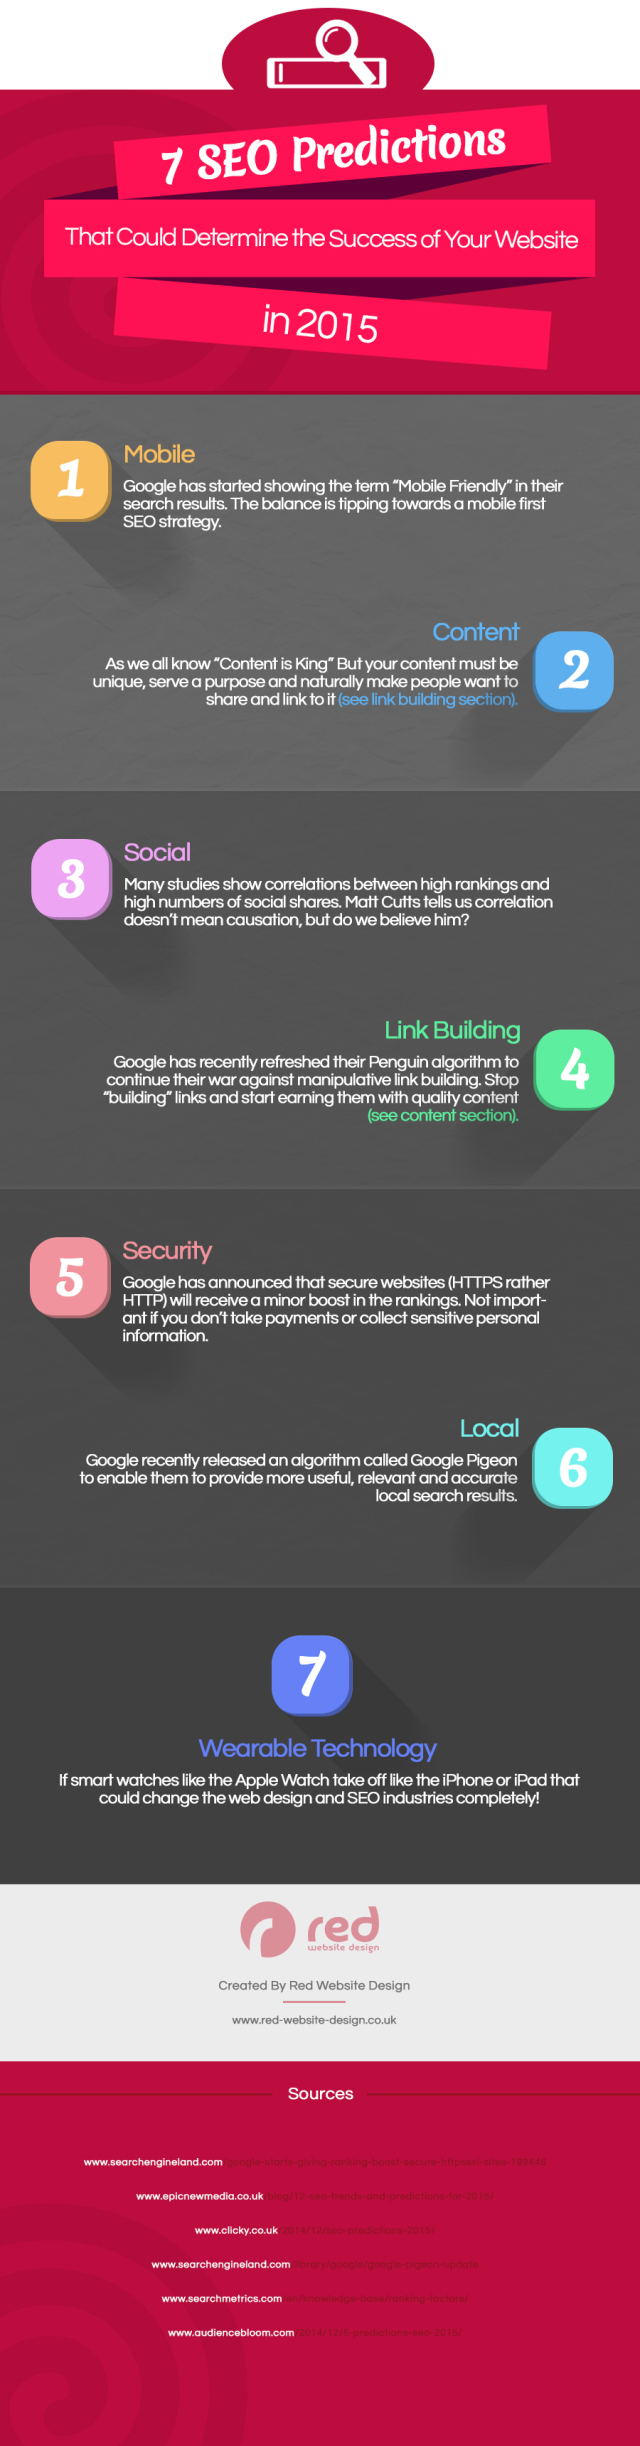 seo tips for 2015